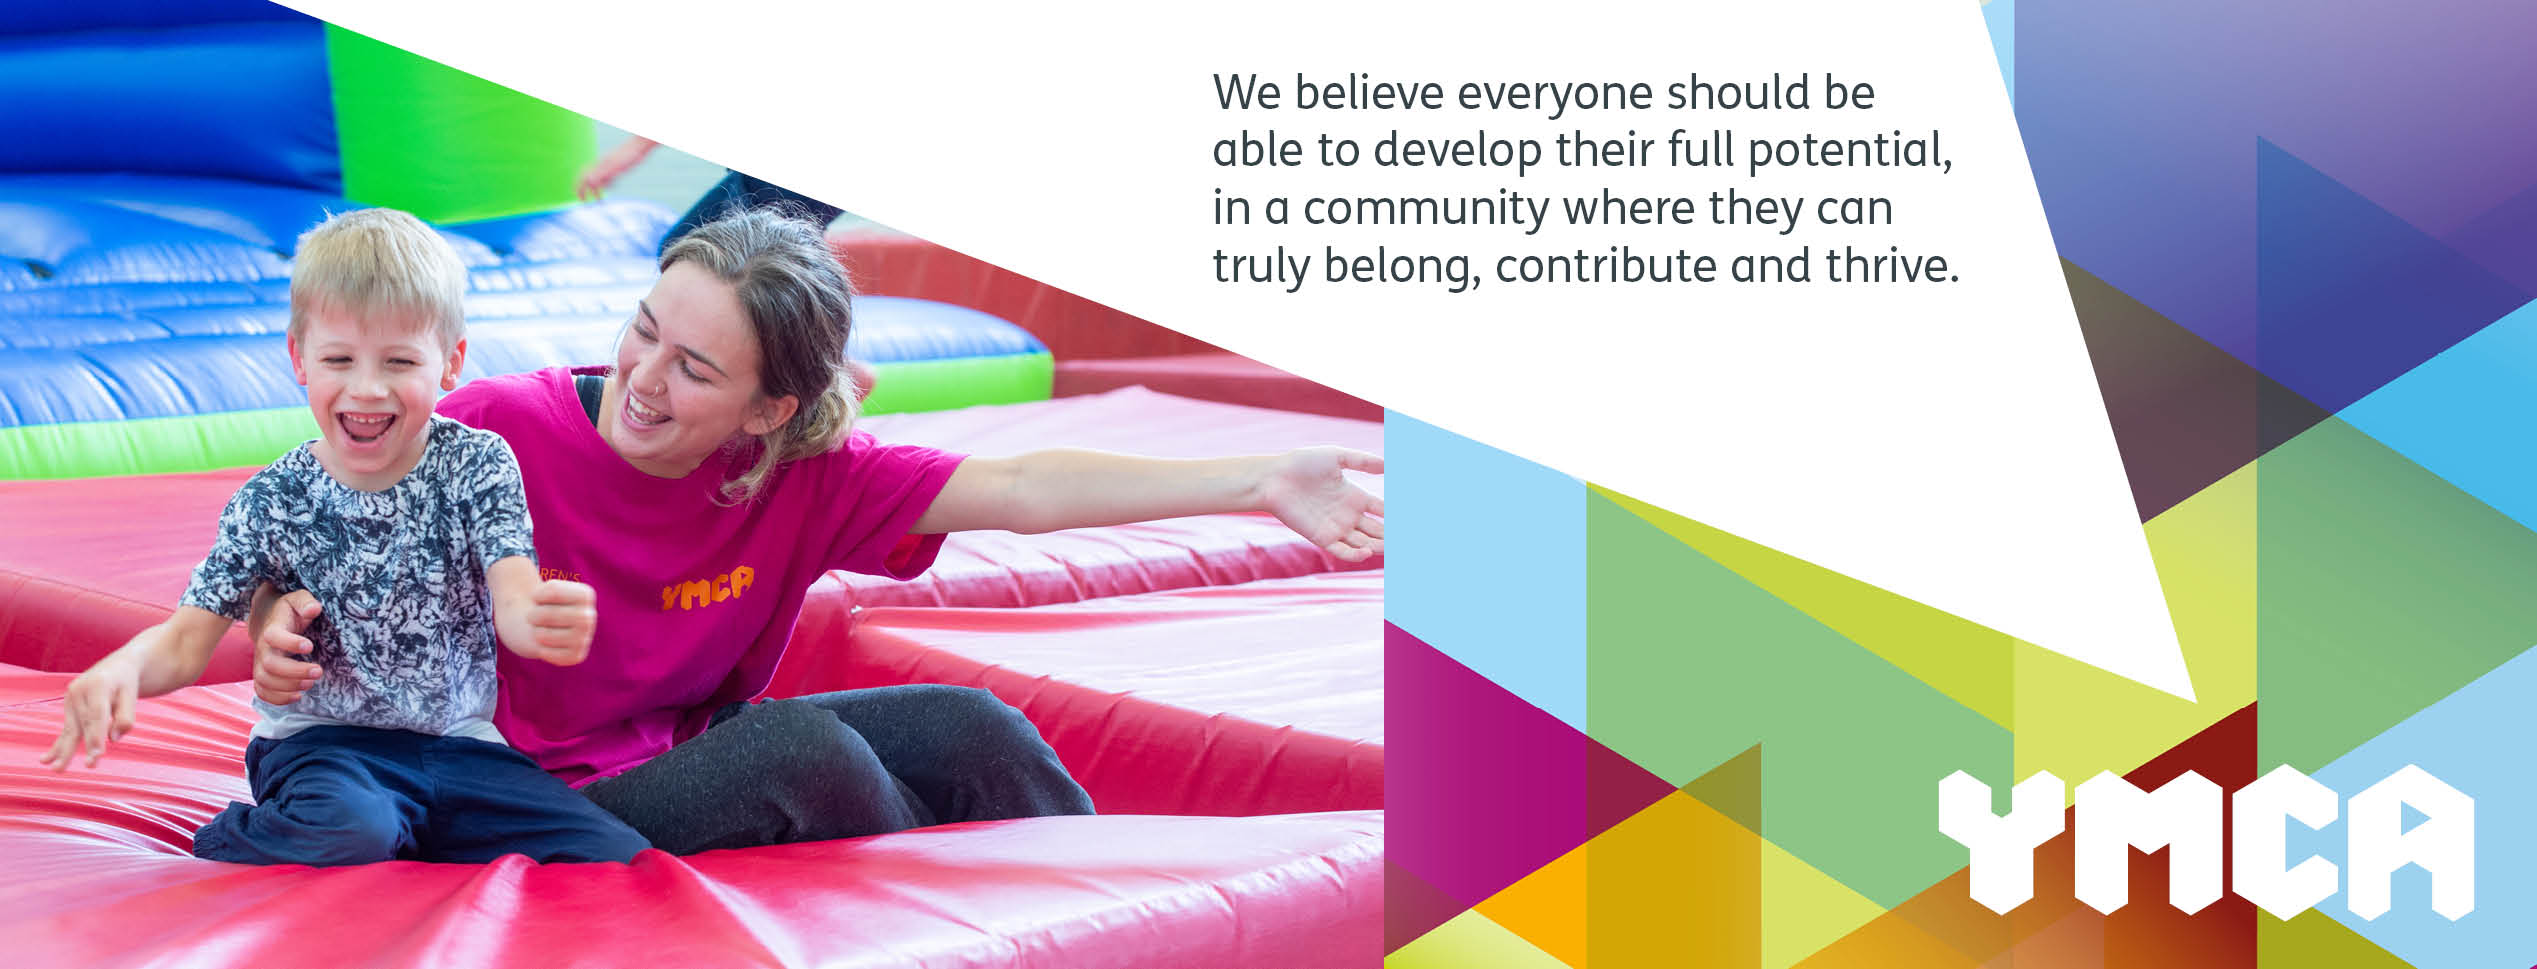 Home Page Banner For New Ymca Website2 